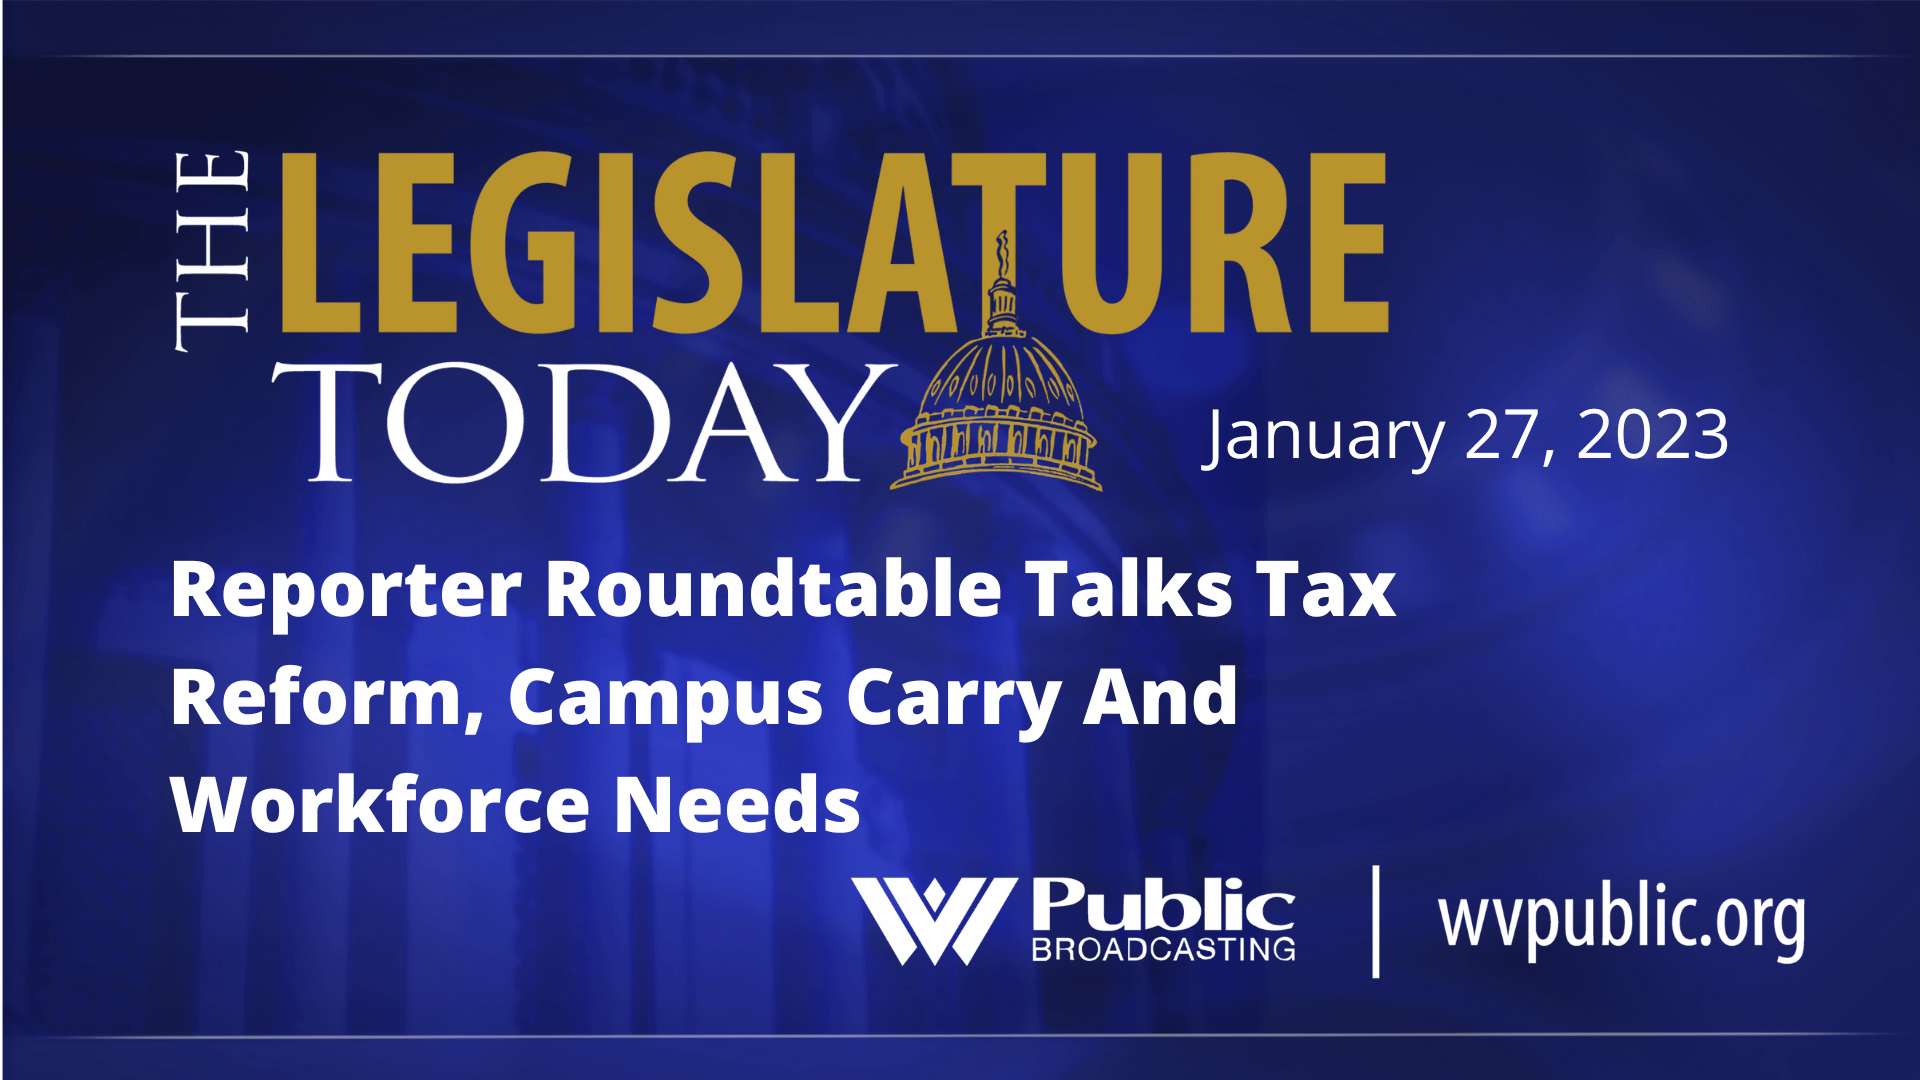 Reporter Roundtable Talks Tax Reform, Campus Carry And Workforce Needs